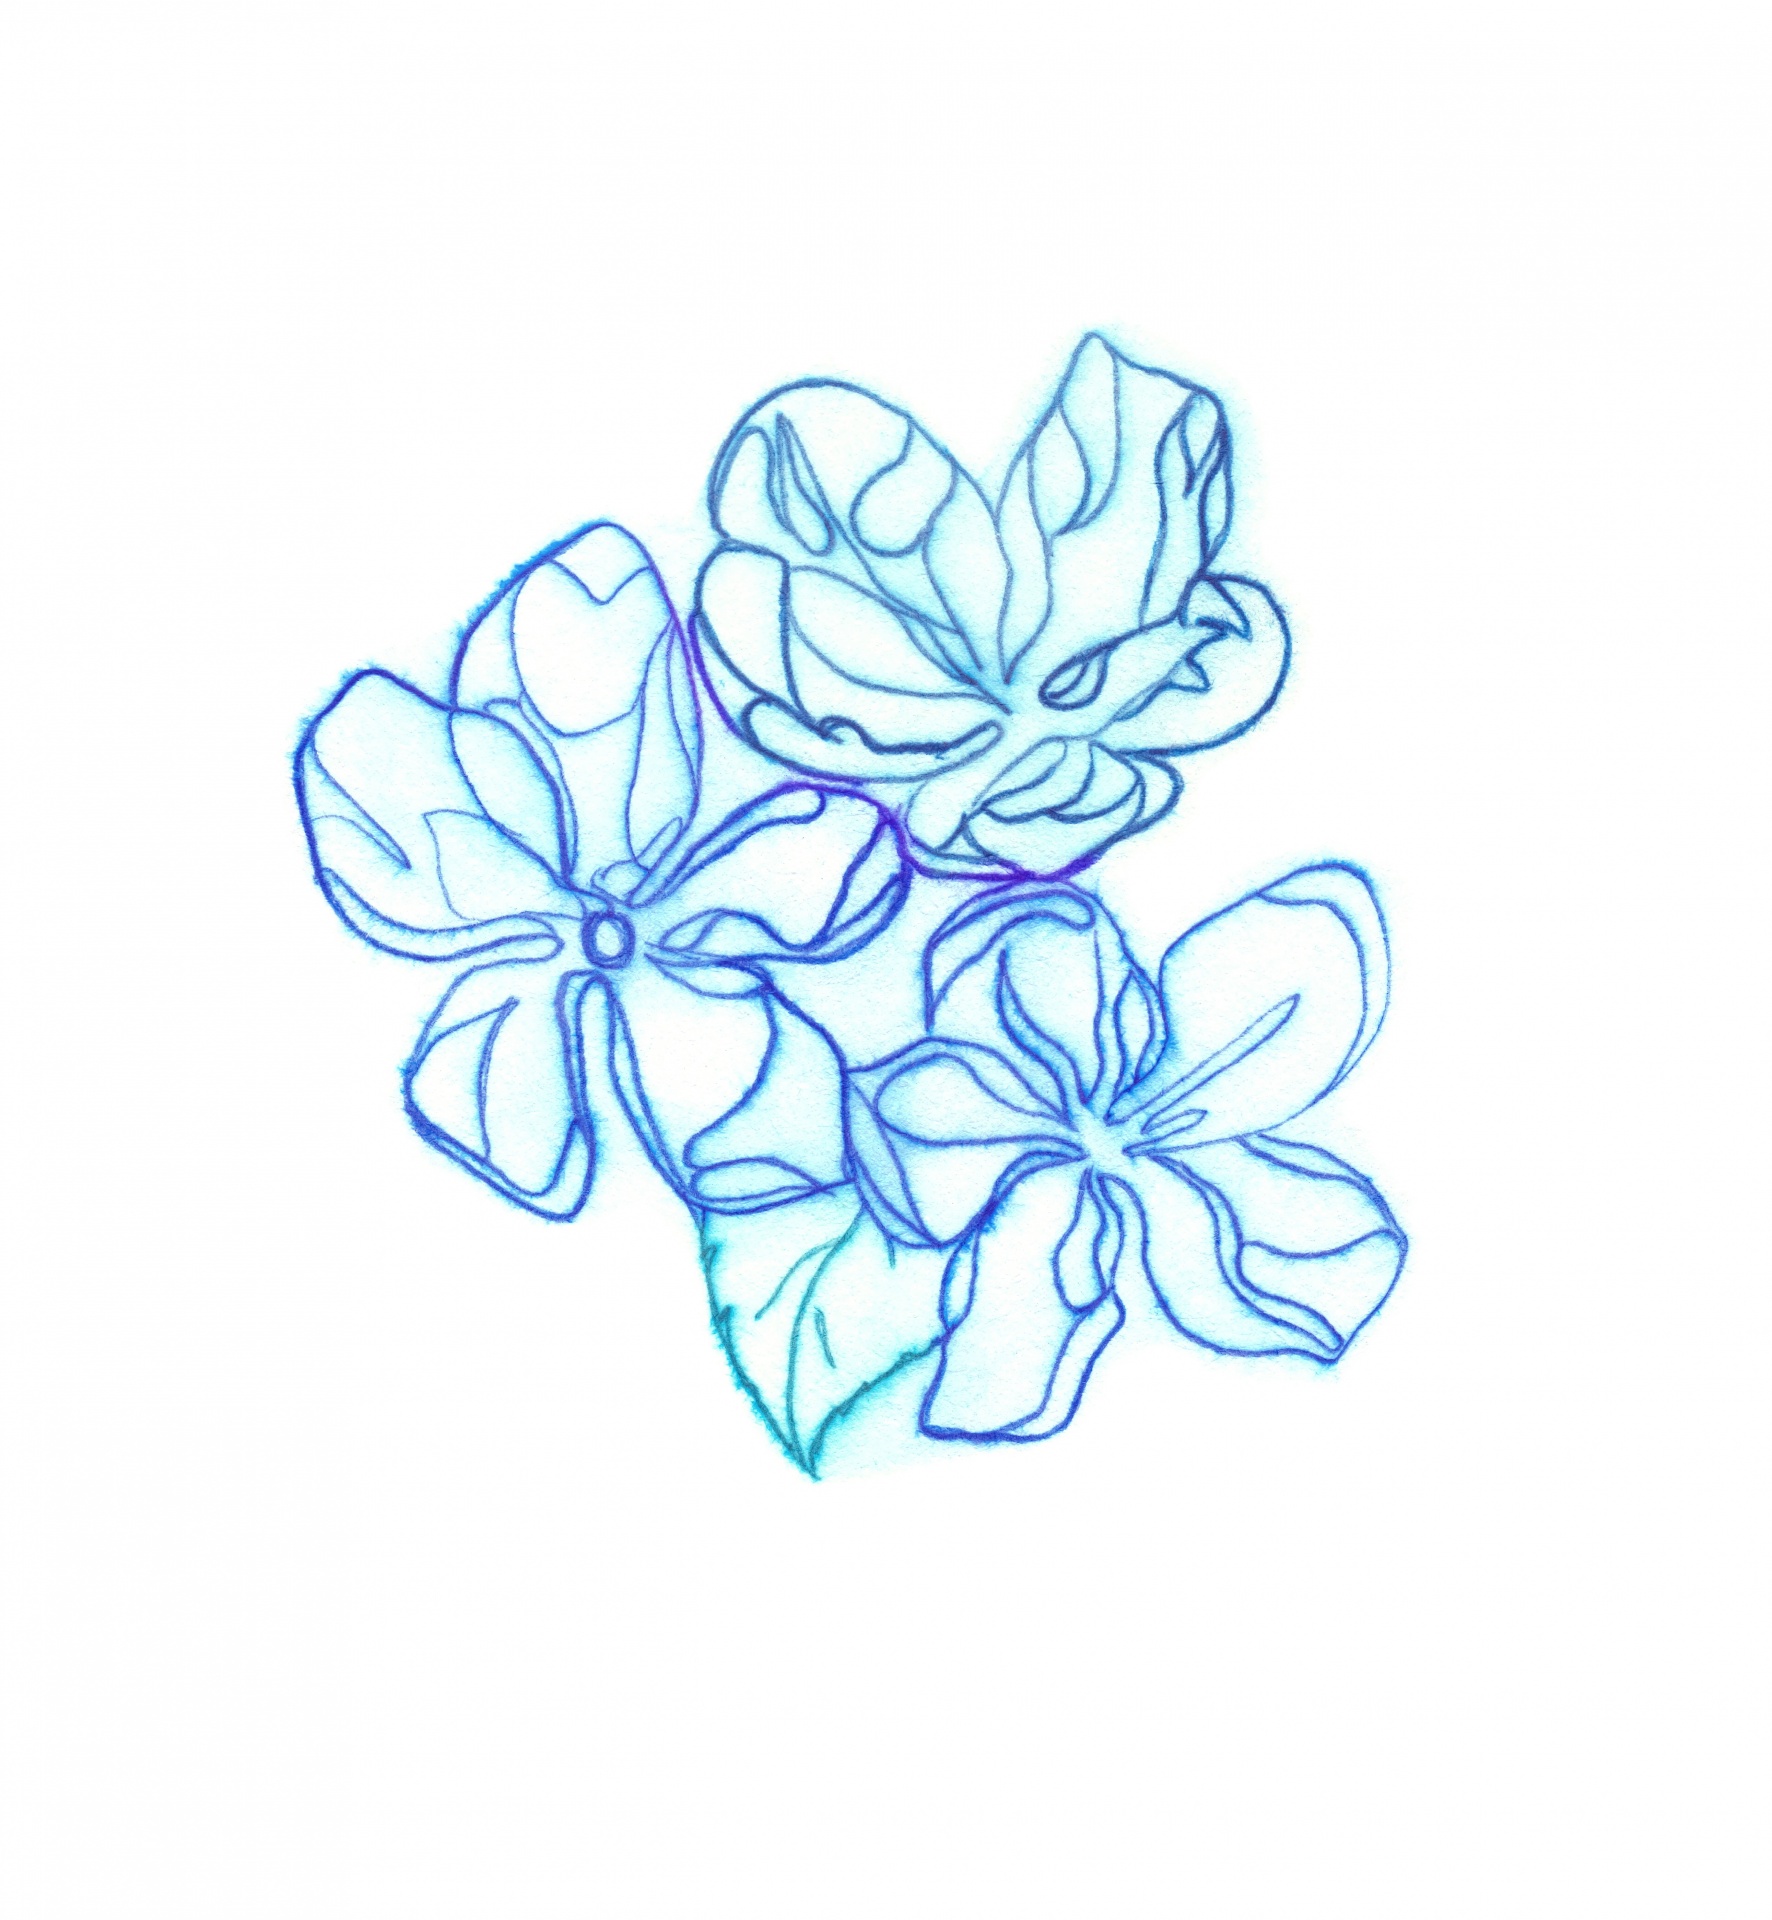 Bright Blue Ink Sketched Flowers Free Stock Photo - Public Domain Pictures